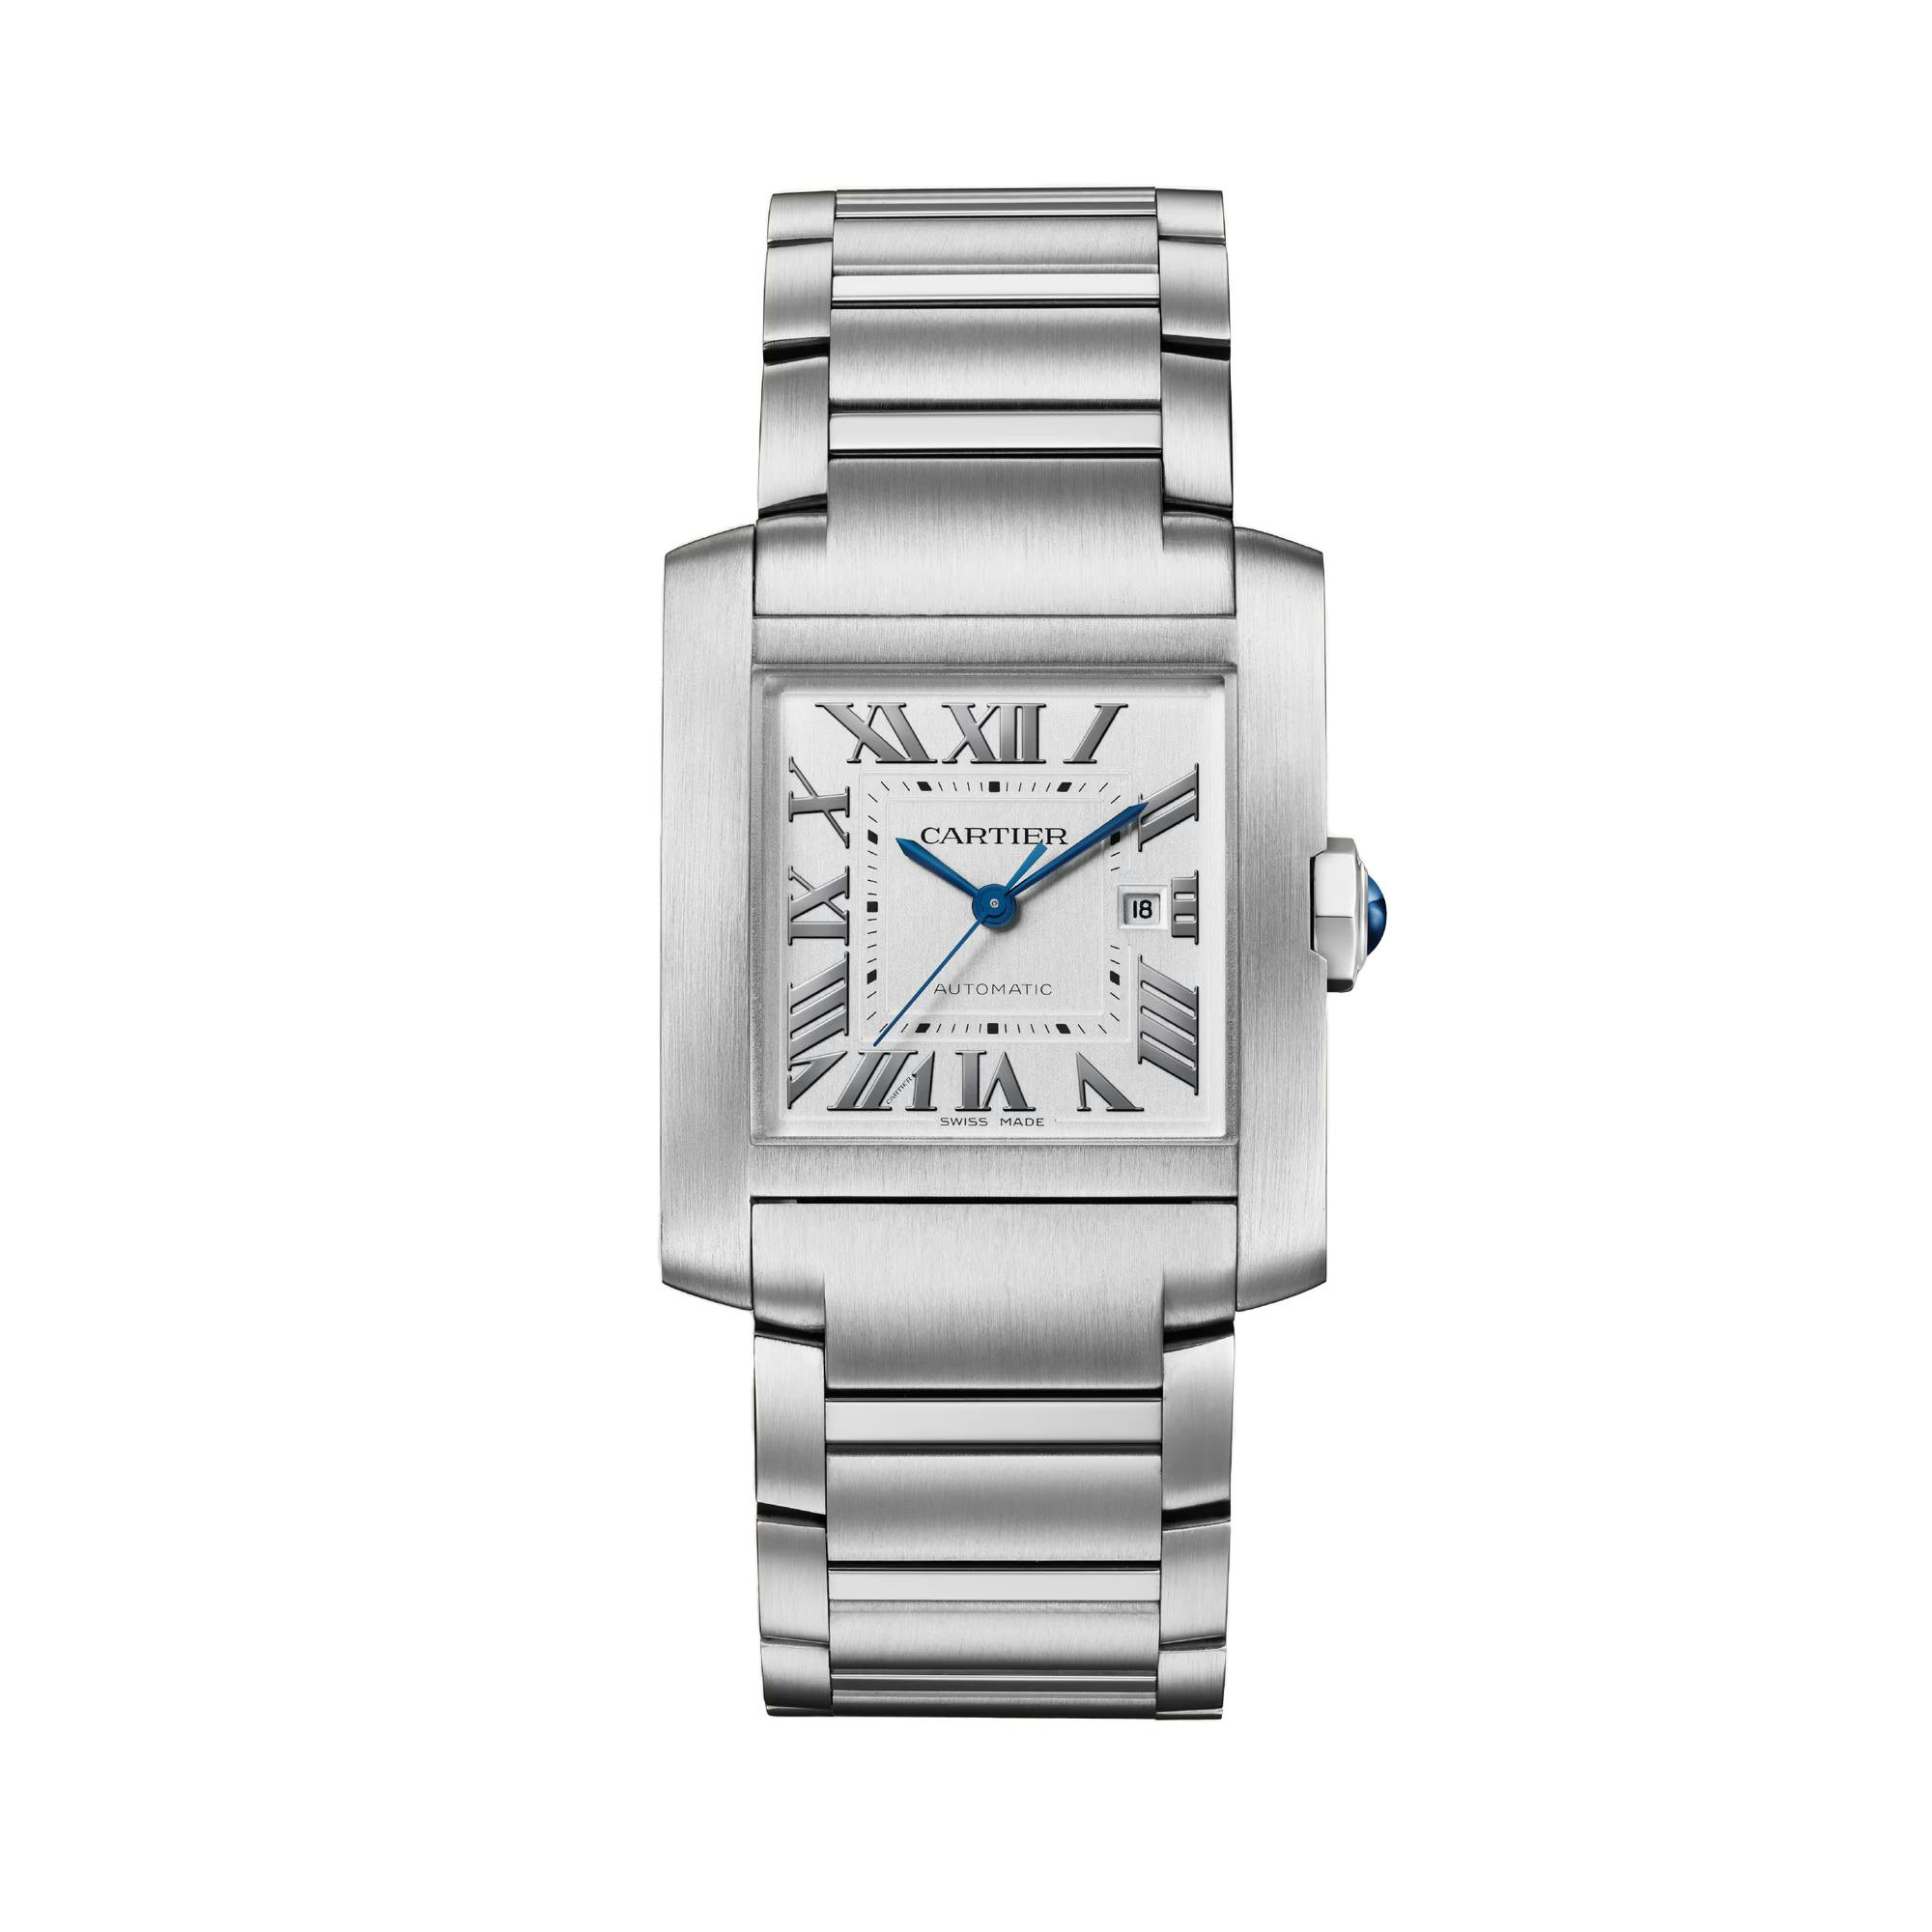 Cartier Tank Francaise Watch, large model 0